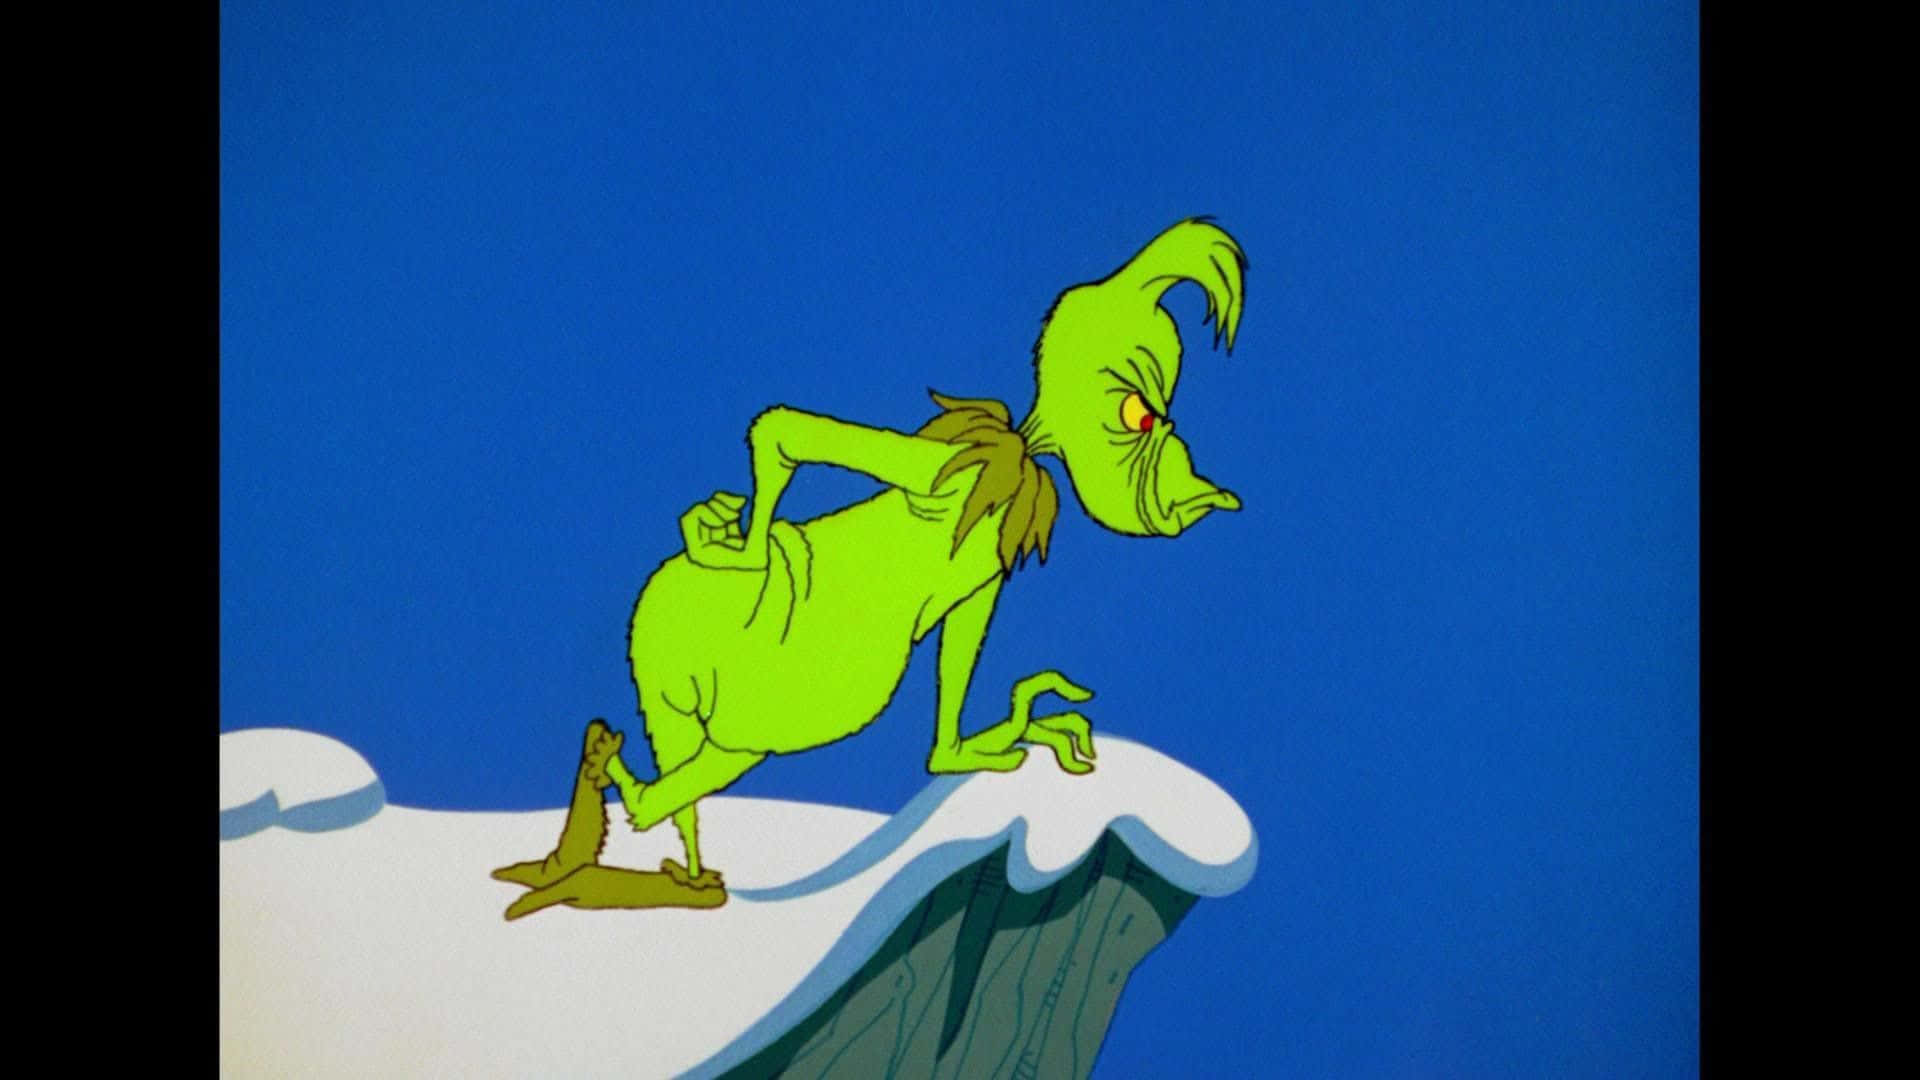 The Grinch In The Snow